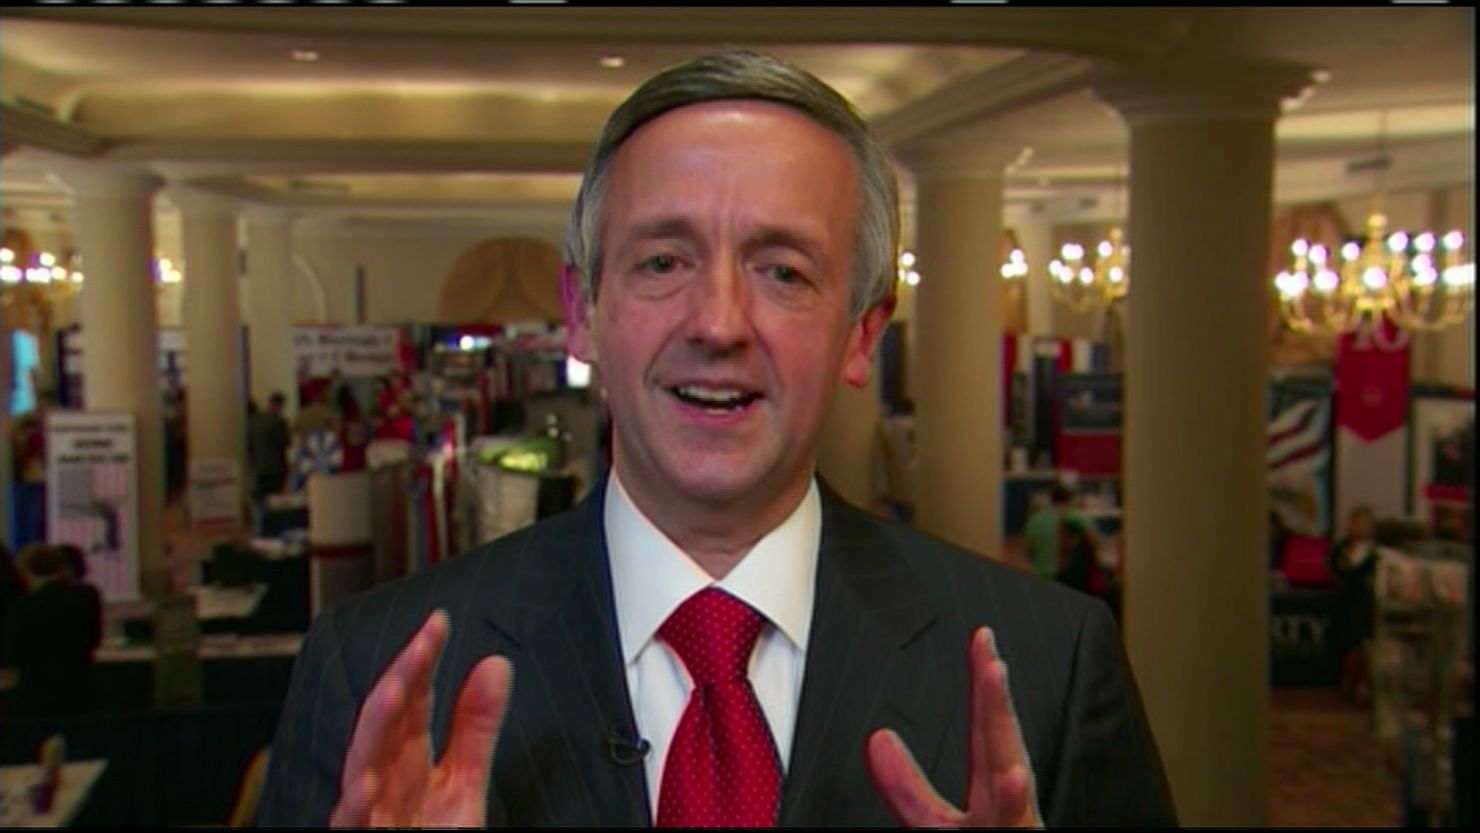 The Rev. Robert Jeffress, who supports Rick Perry, created a hornet's nest by saying he believes Mormonism is a cult. 